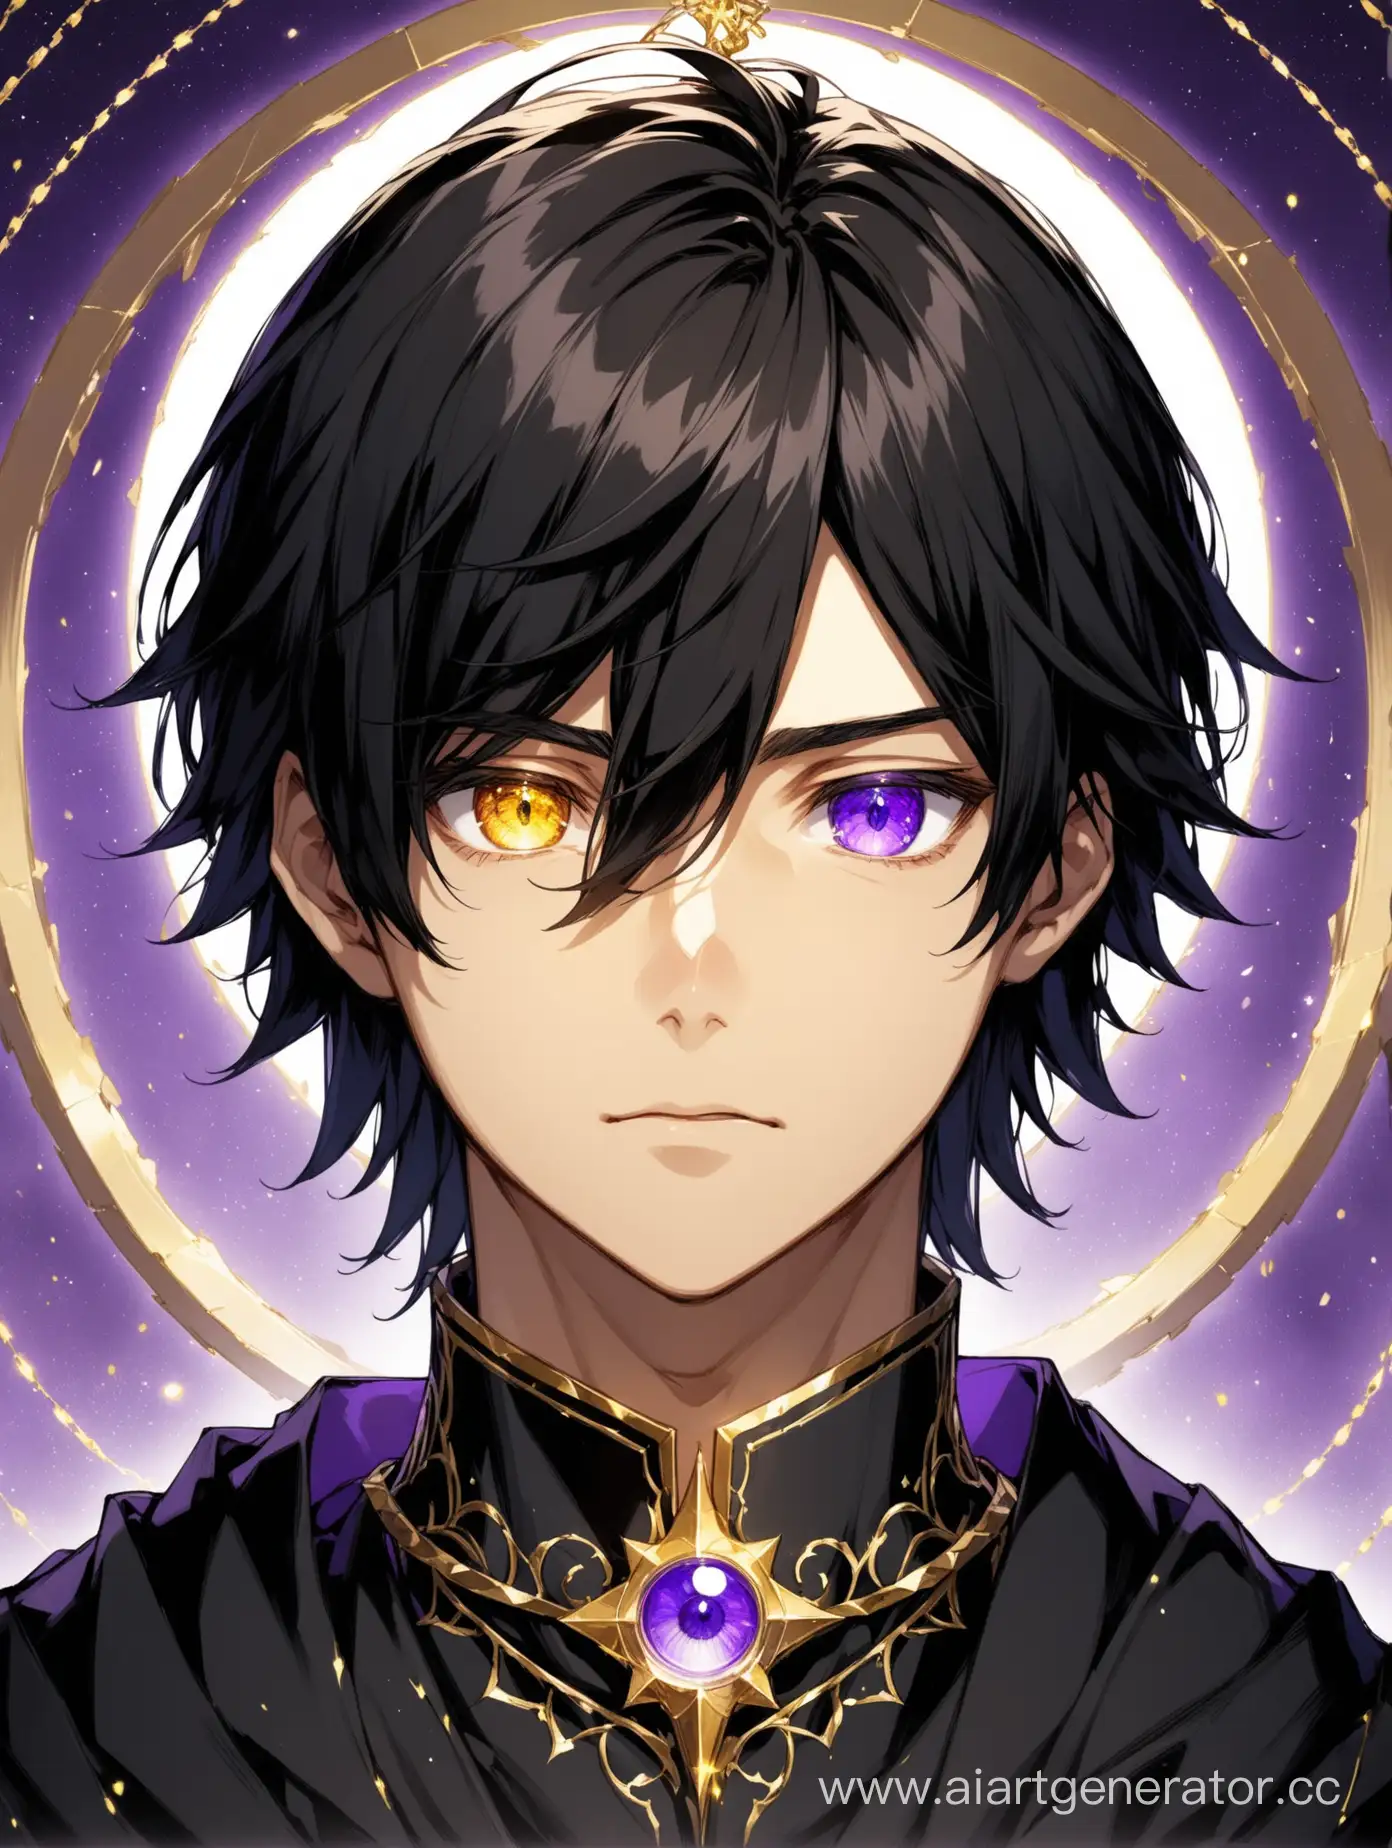 Enigmatic-Young-Man-with-Heterochromia-in-Black-Robe-and-Violet-Aura